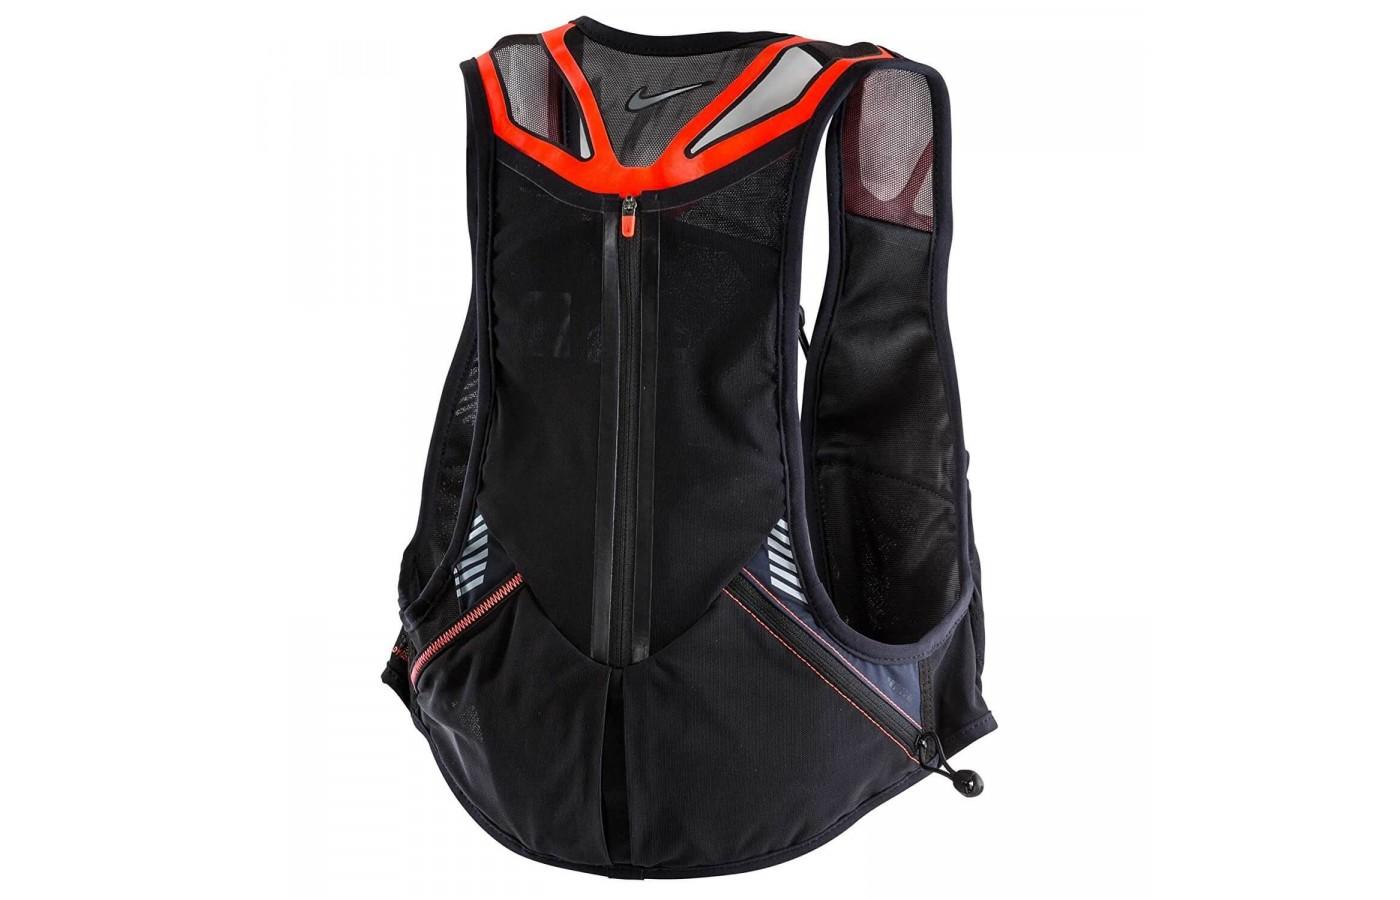 The vest features breathable mesh and welded overlays